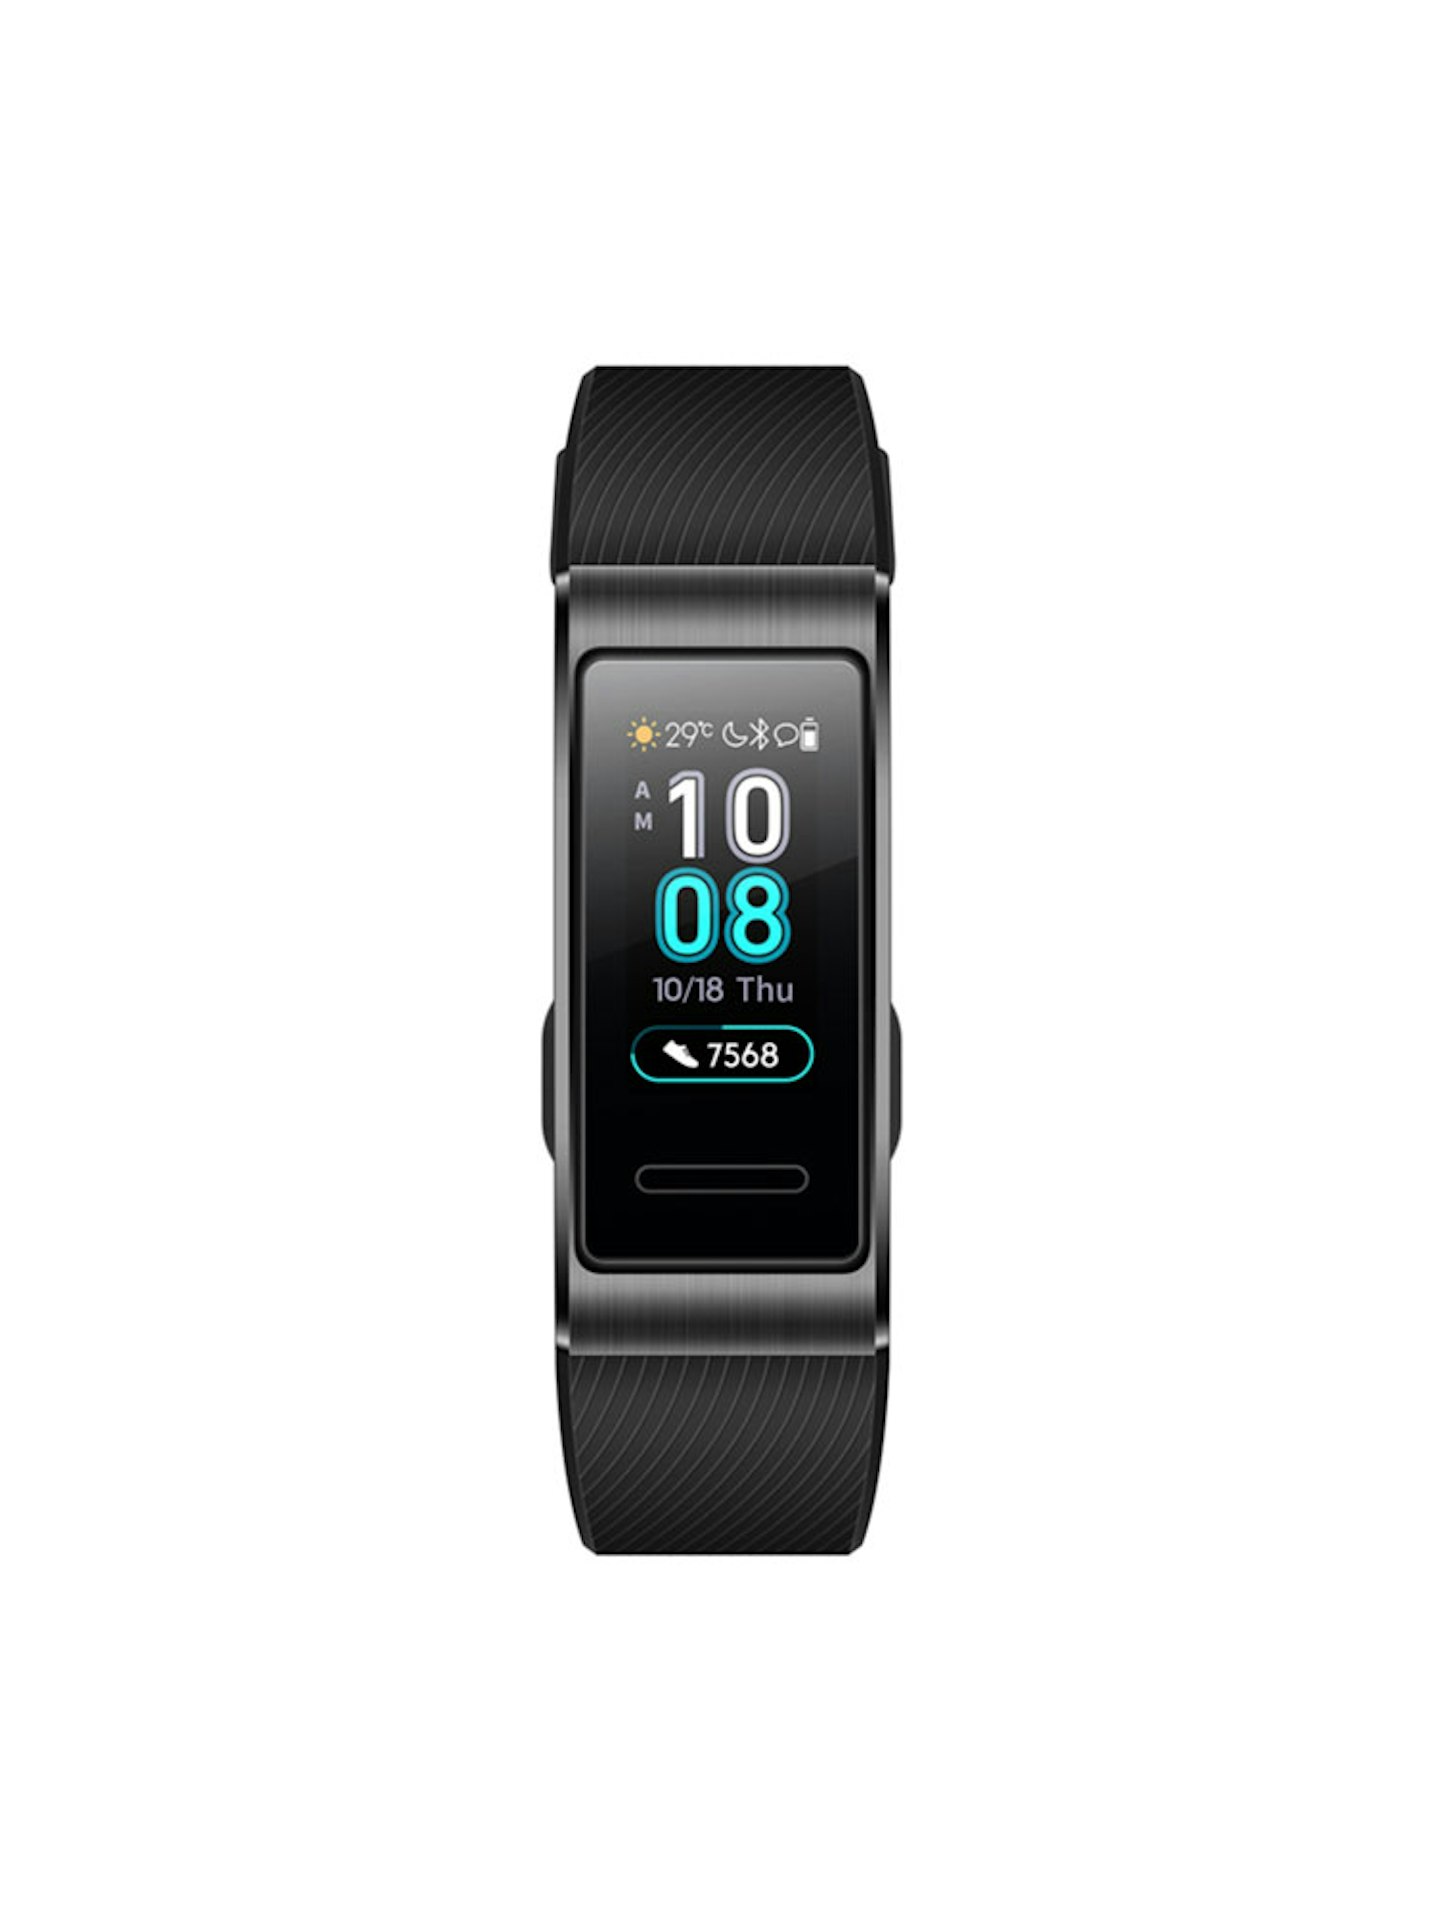 Huawei Band 3 Pro Activity Tracker very